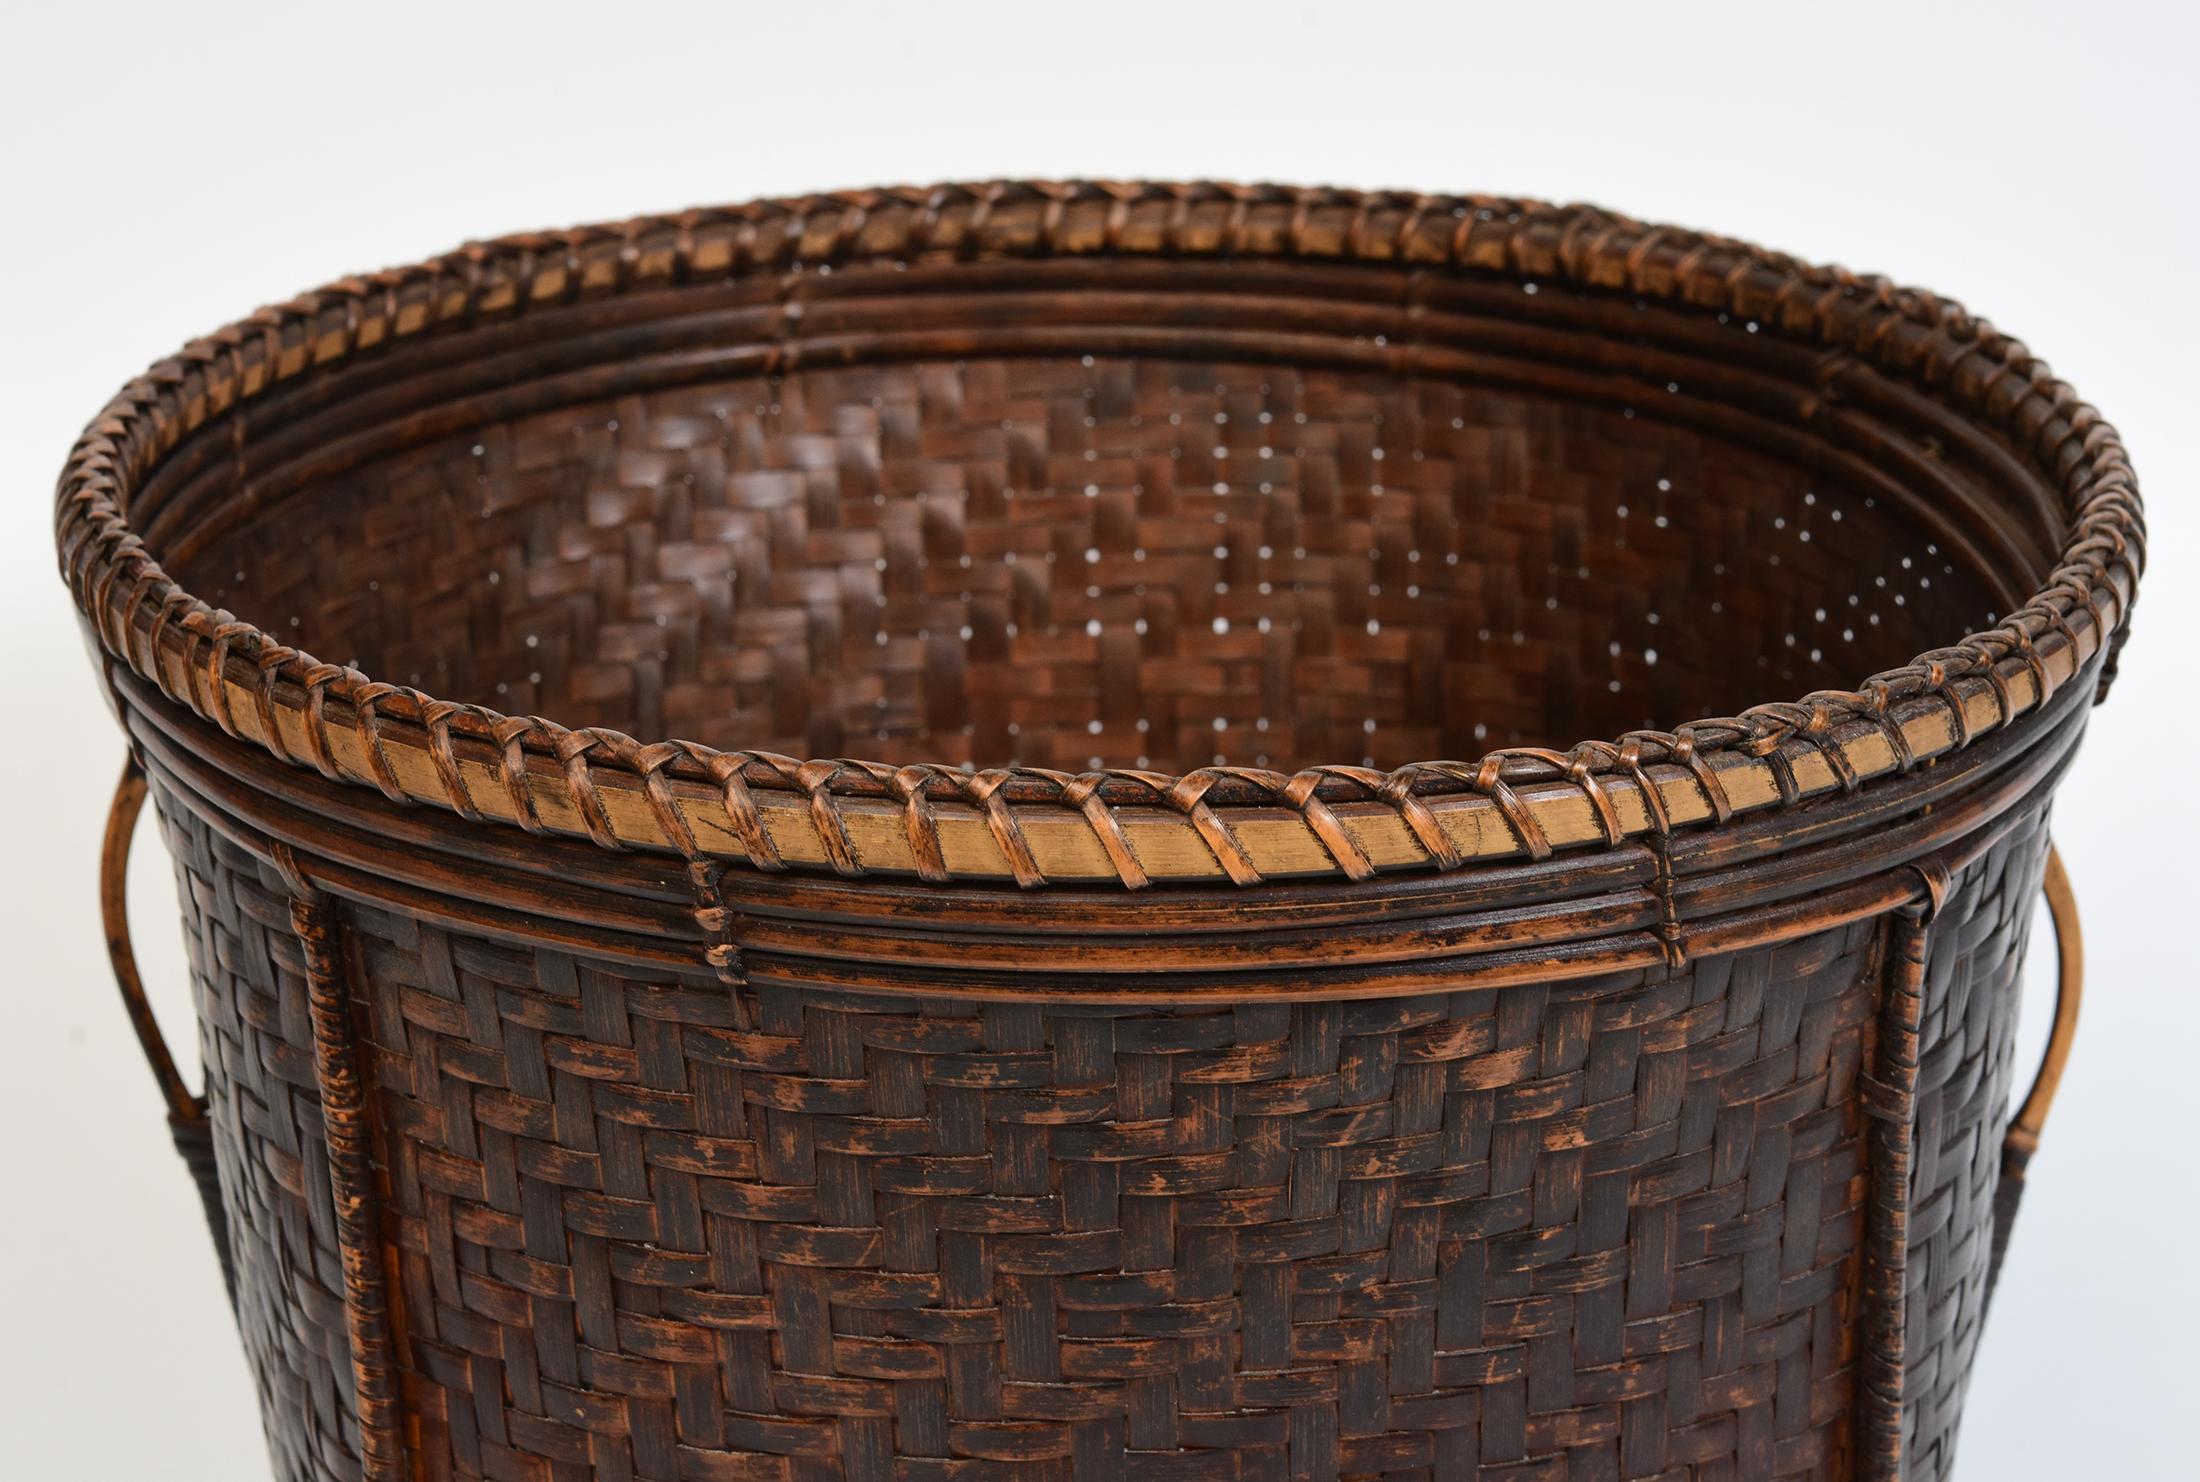 Laos bamboo basket with cover.

Age: Laos, 20th Century
Size: Height 21.8 C.M. / Diameter 27 C.M.
Condition: Nice condition overall.